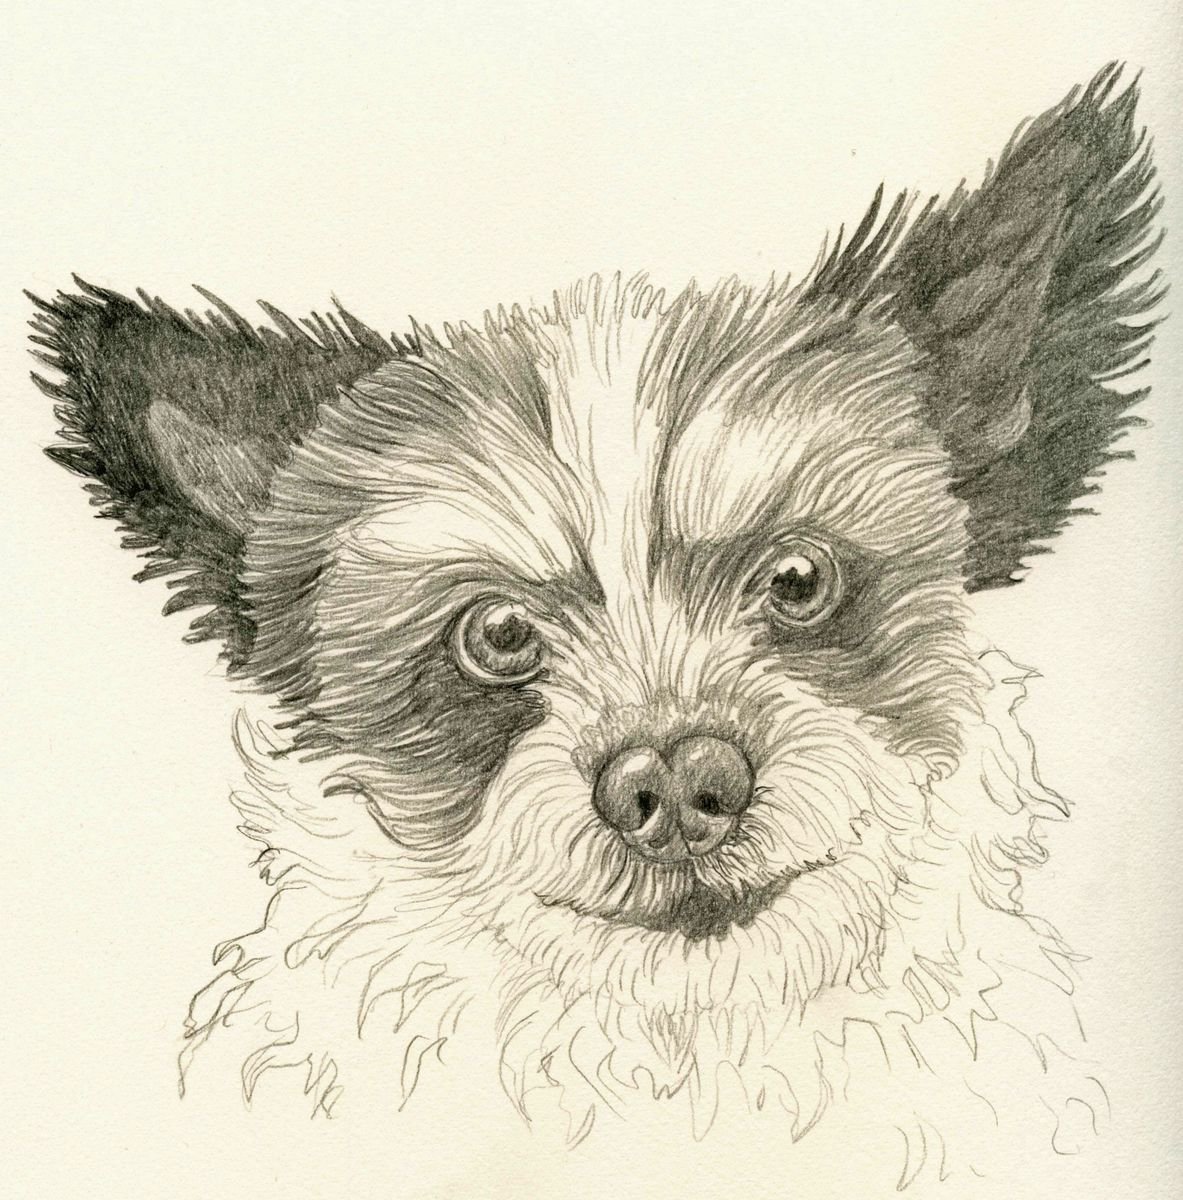 Black and White Terrier Mix Study Dog Art Original Graphite Pencil Drawing 9 x 9 Inches-Ca... by carla smale